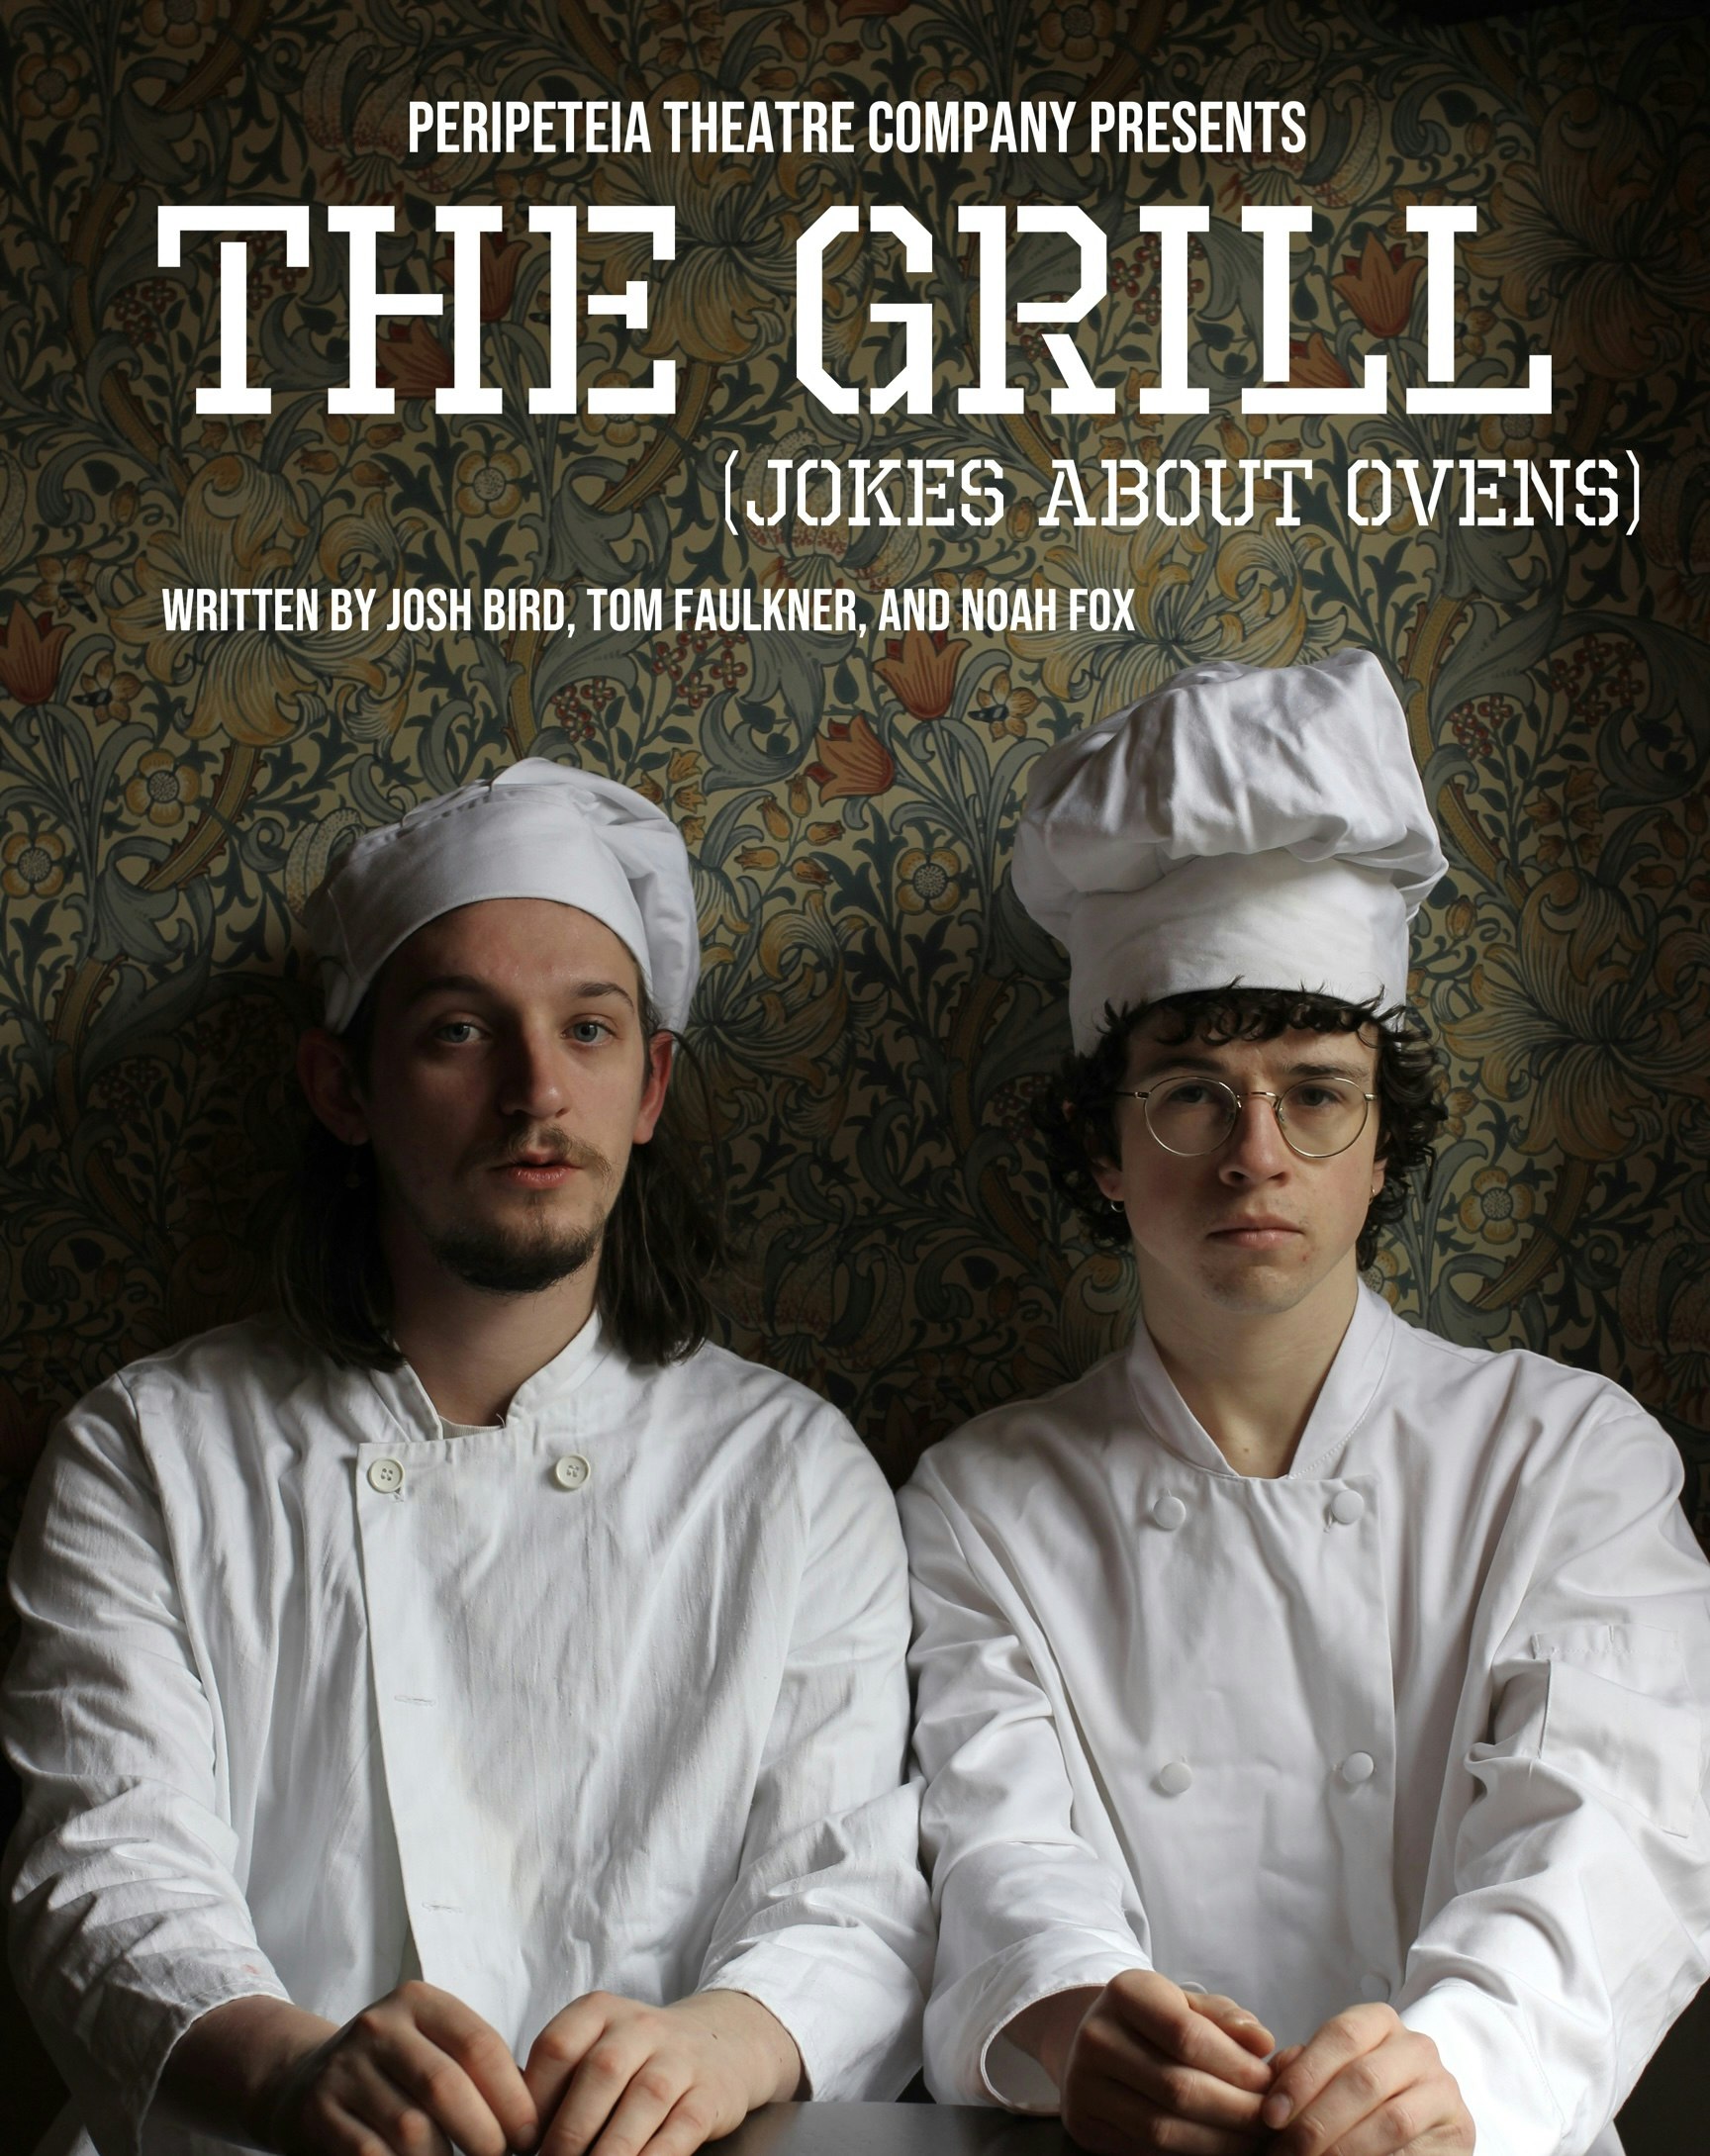 The Grill (Jokes About Ovens)